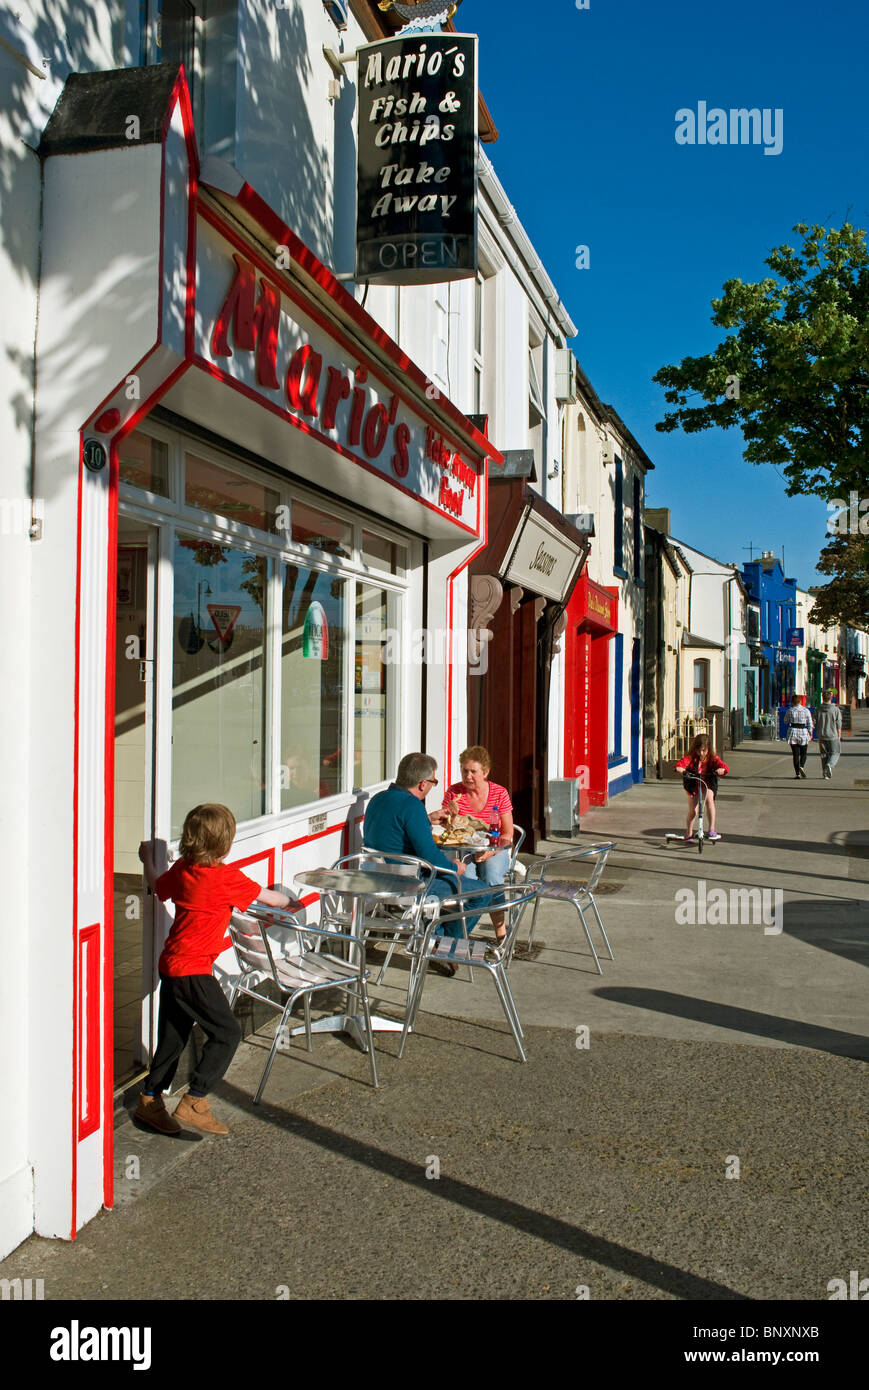 A street scene outside  a fast  food  restaurant  in the 